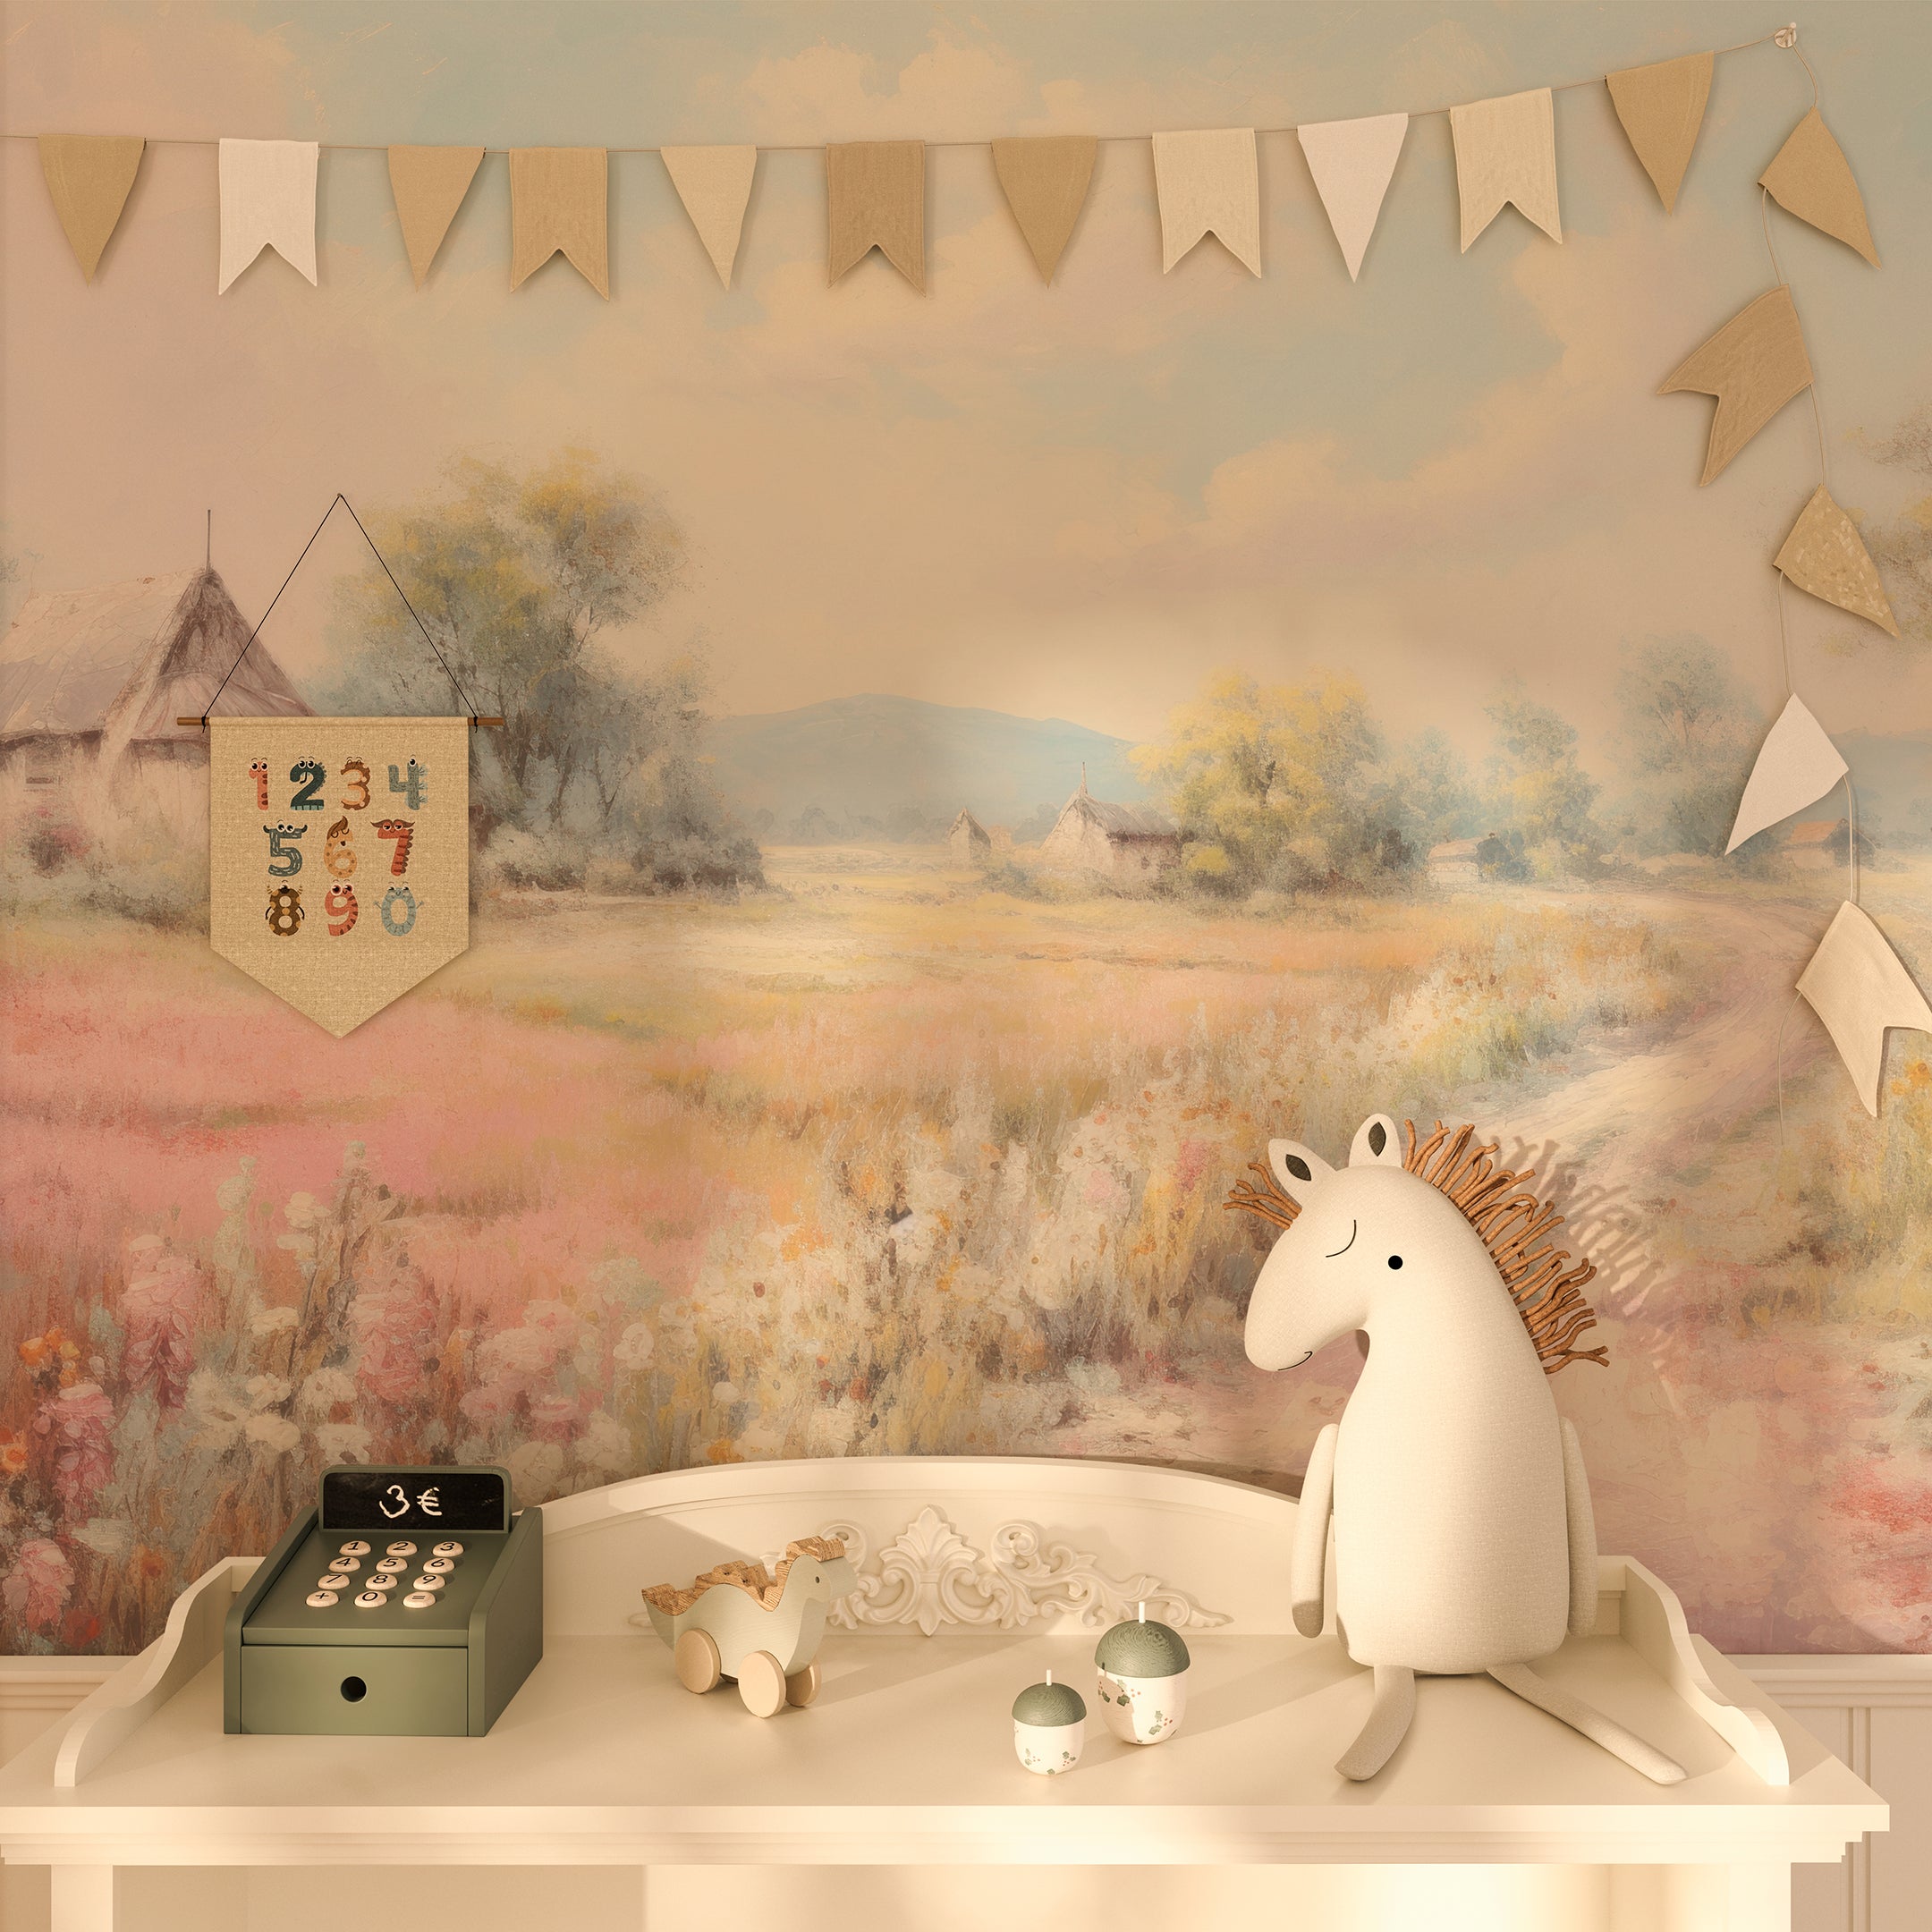 The 'Country Road Mural' wallpaper in a children's room setting, featuring a whimsical design with a dirt path winding through wildflower meadows towards quaint cottages. The mural's pastel tones and serene countryside scene provide a calming background for playful decor.